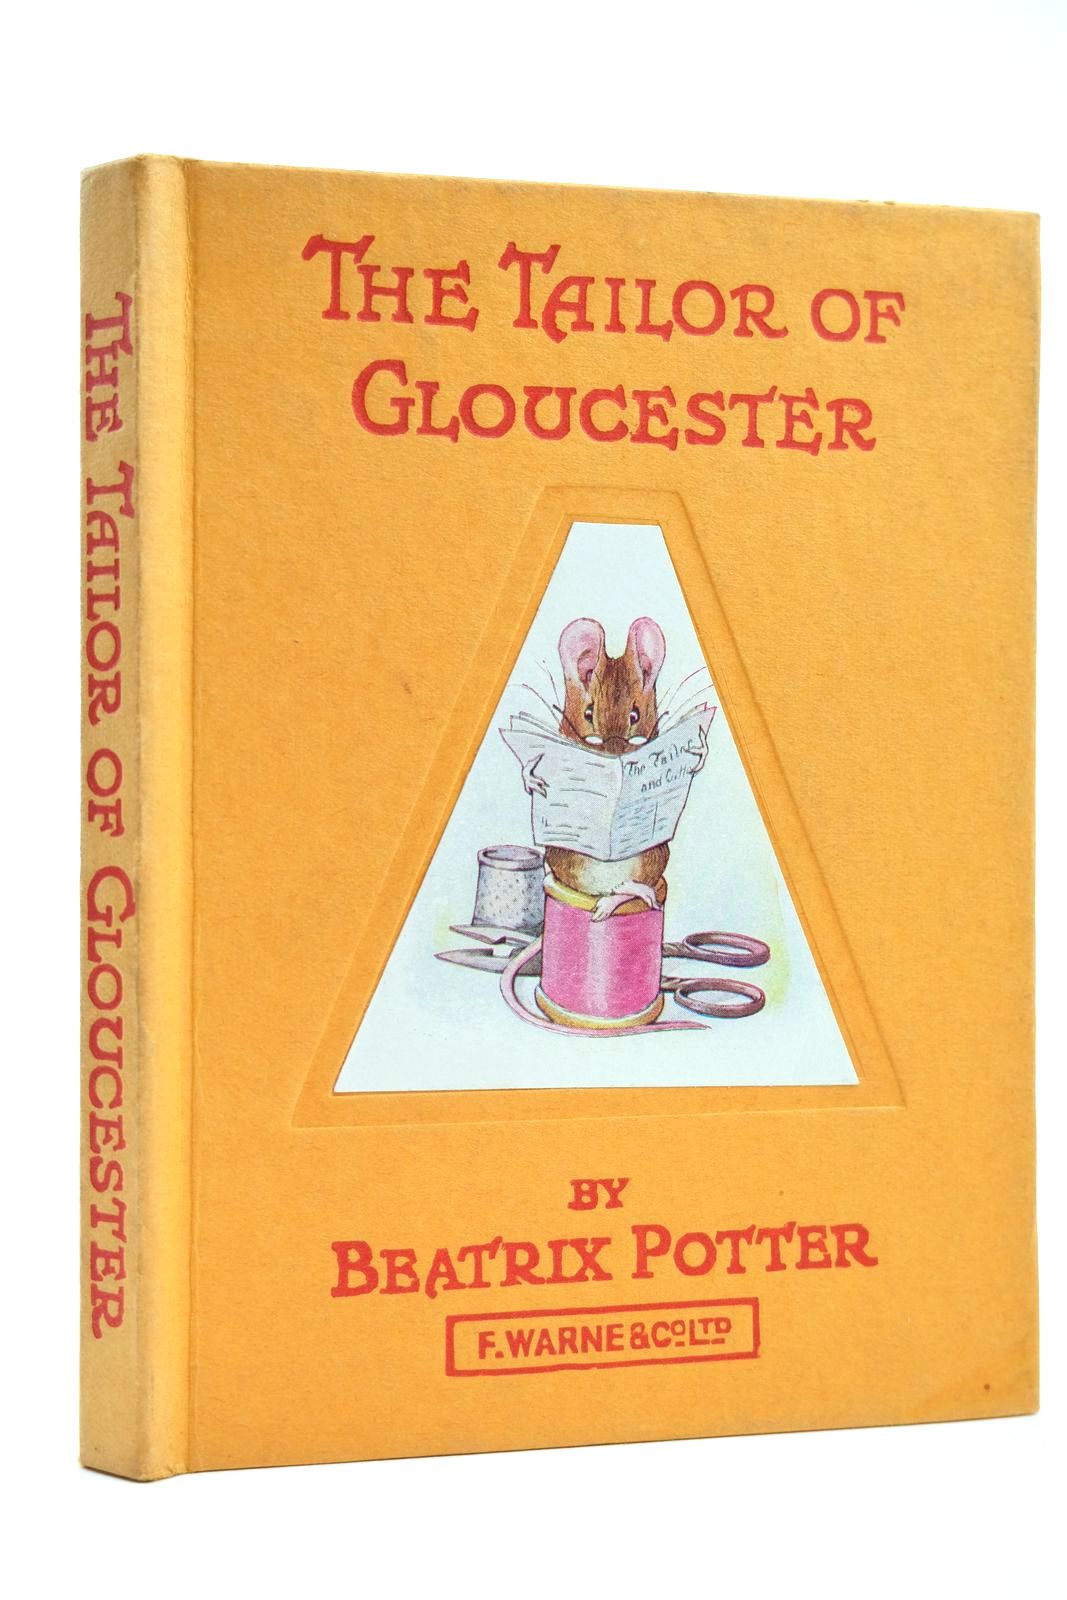 Photo of THE TAILOR OF GLOUCESTER written by Potter, Beatrix illustrated by Potter, Beatrix published by Frederick Warne & Co Ltd. (STOCK CODE: 2131893)  for sale by Stella & Rose's Books